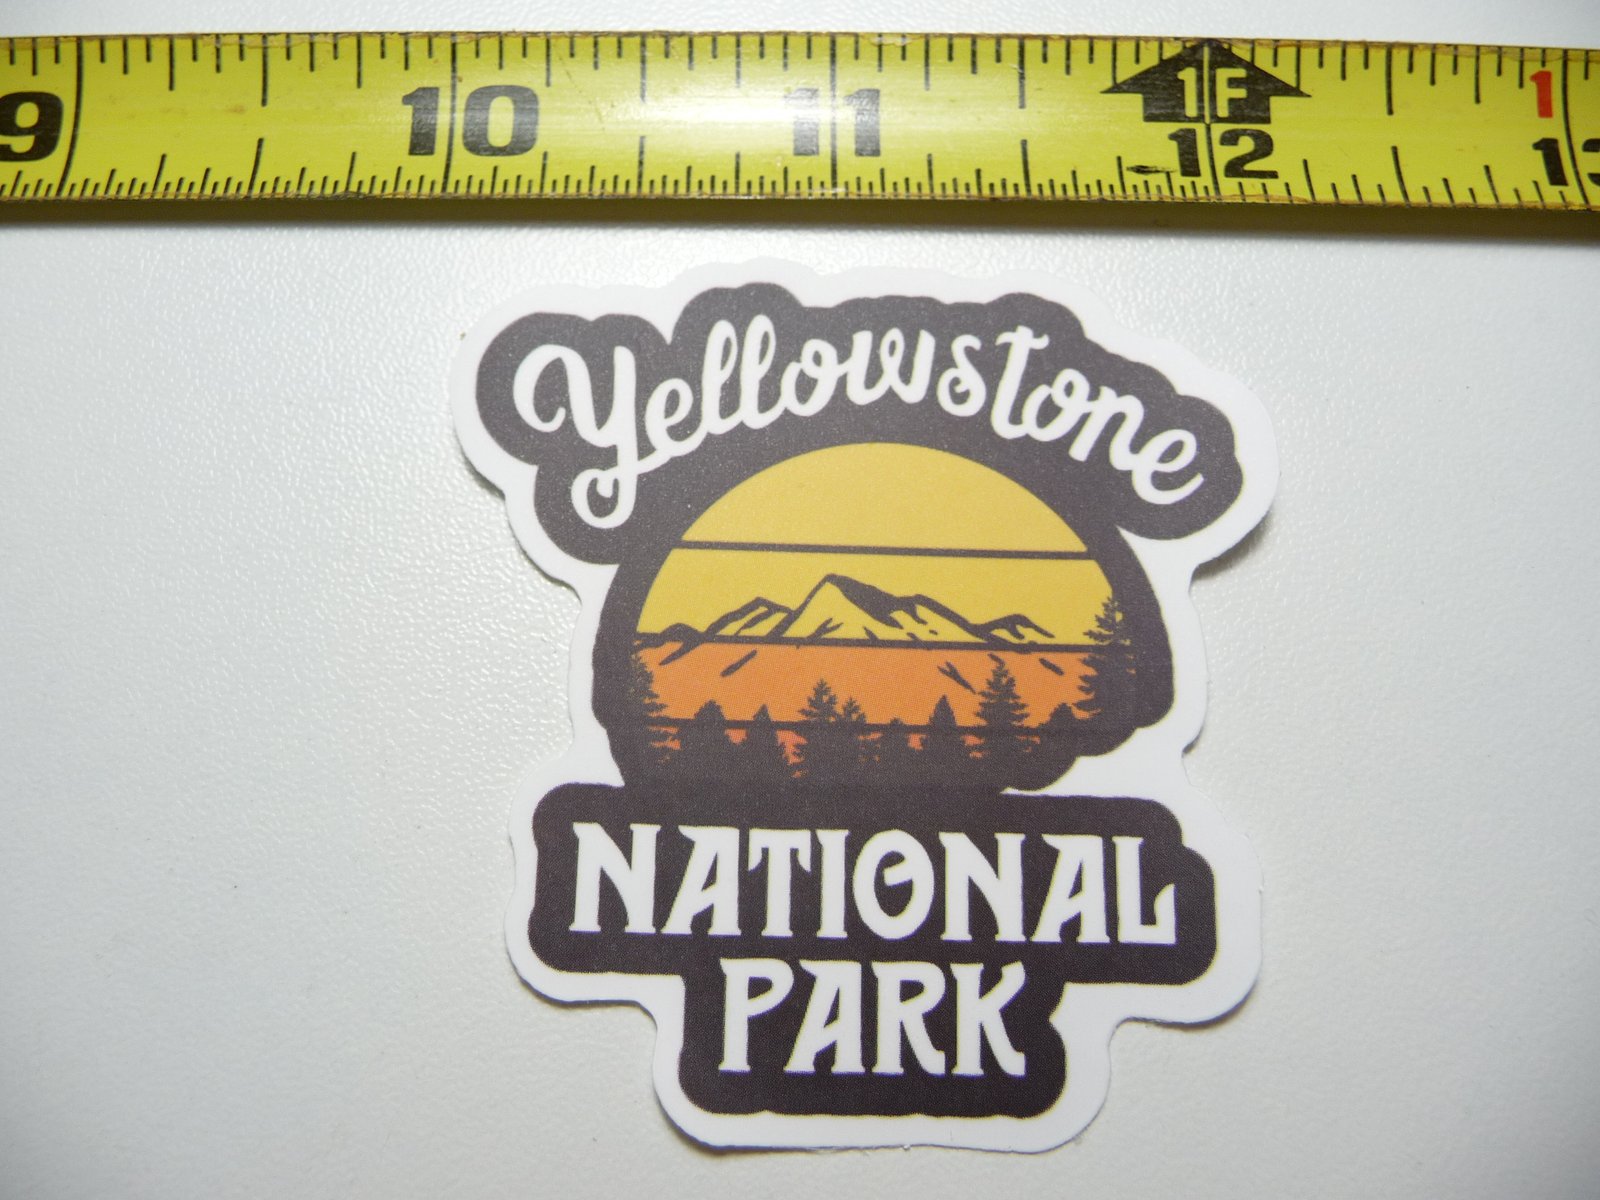 YELLOWSTONE NATIONAL PARK WYOMING #7 DECAL STICKER HIKING CAMPING NATURE OUTDOOR - Afbeelding 1 van 1